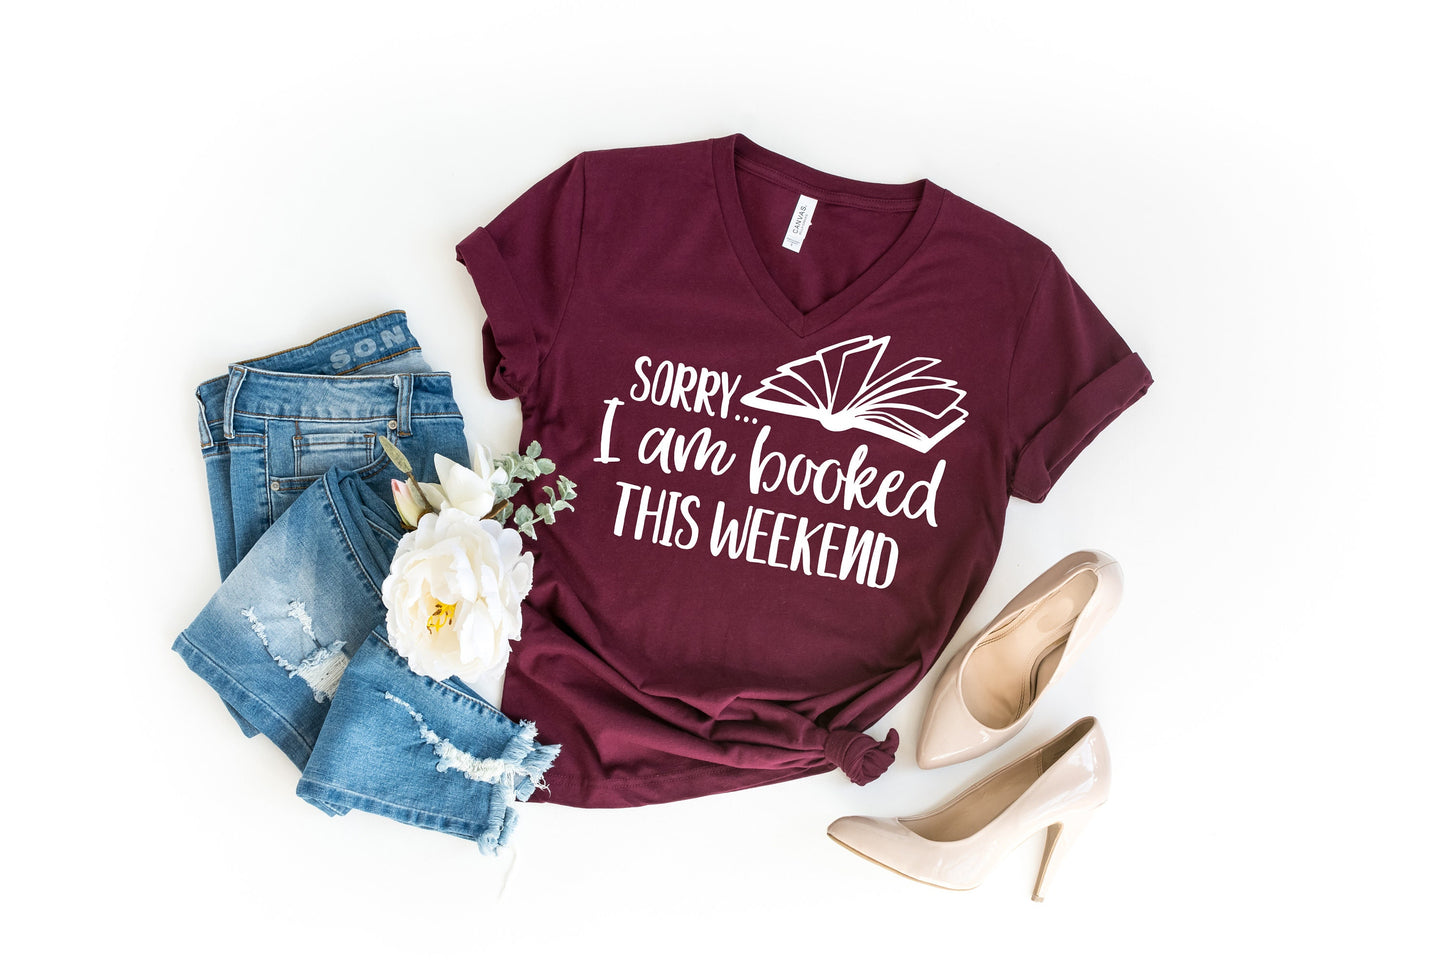 Sorry I am Booked This Weekend Women's V-neck T-Shirt - introvert shirt - reading shirt - book lover shirt - book lover gift - bookworm gift